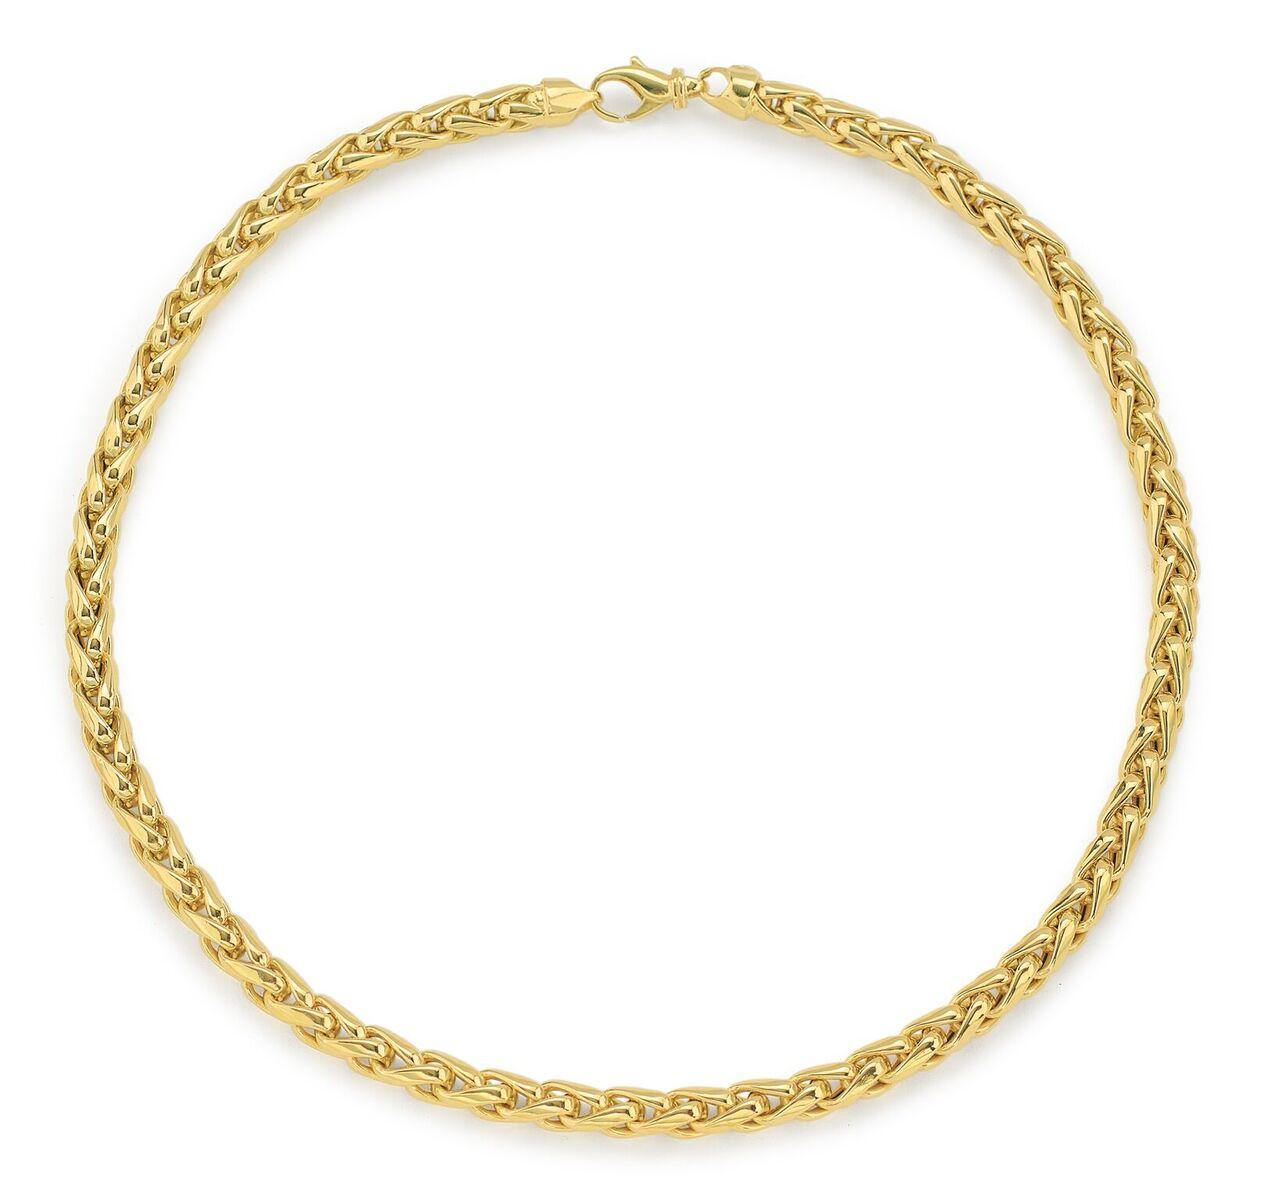 With a simple style that shimmers, this wheat chain necklace in 14K Yellow Gold fits comfortably around the neck and is a classic look you'll want to wear everyday. This necklace encompasses the essence of Italian Gold and is an ideal piece for